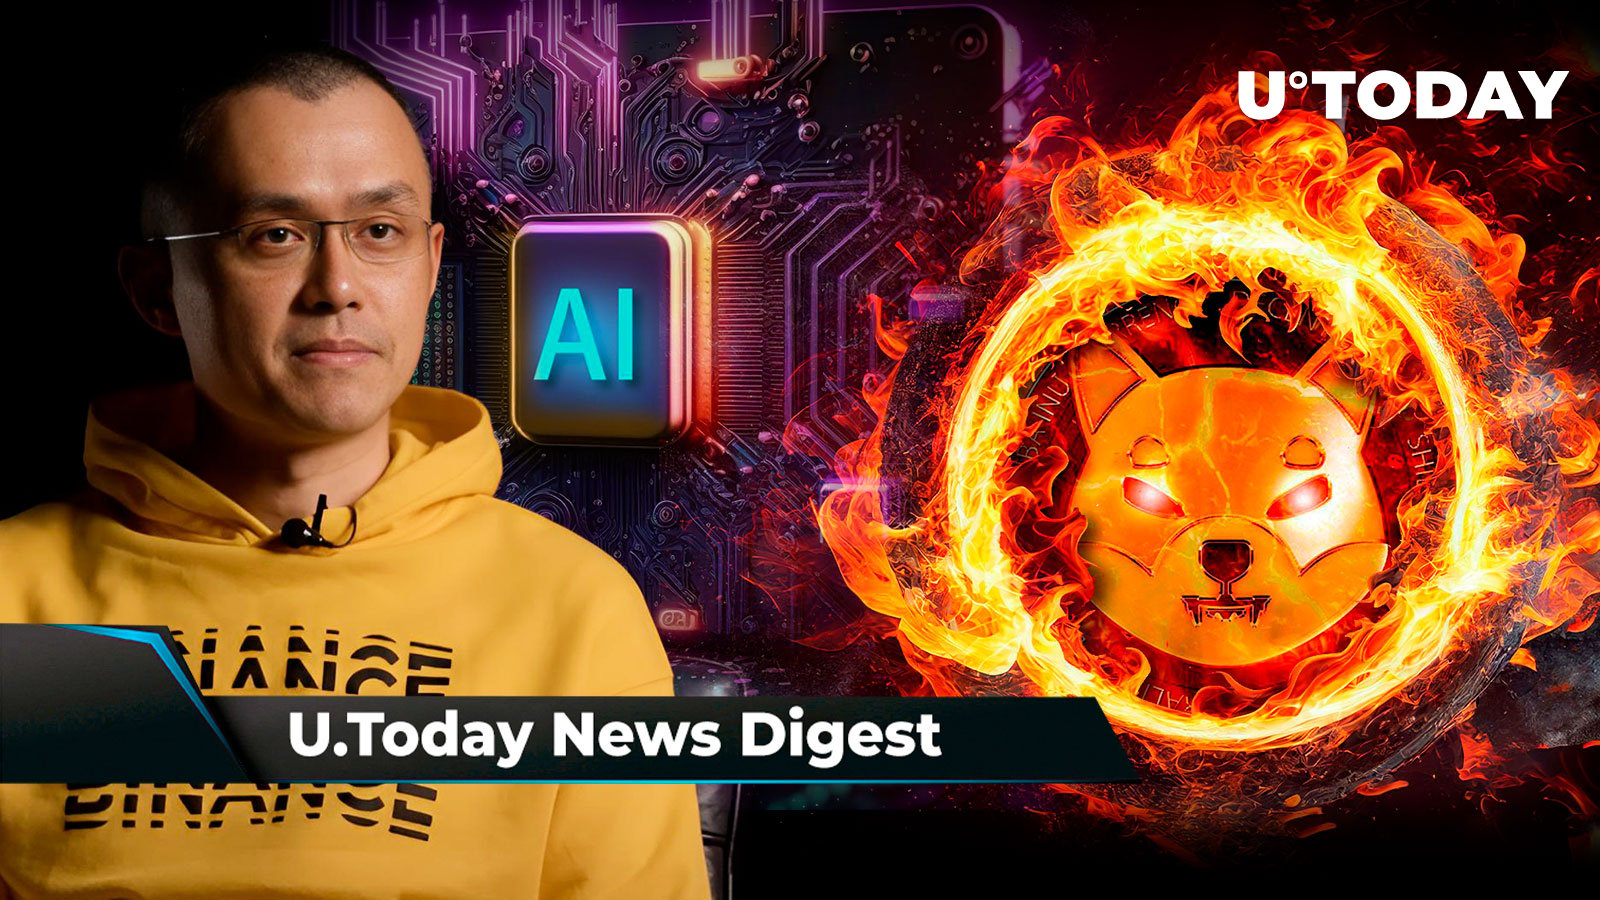 Former Binance Boss Shares AI Plans for New Business Venture, Terraform’s Do Kwon Extradition Takes New Turn, Shiba Inu Burns Surge 48,554%: Crypto News Digest by U.Today